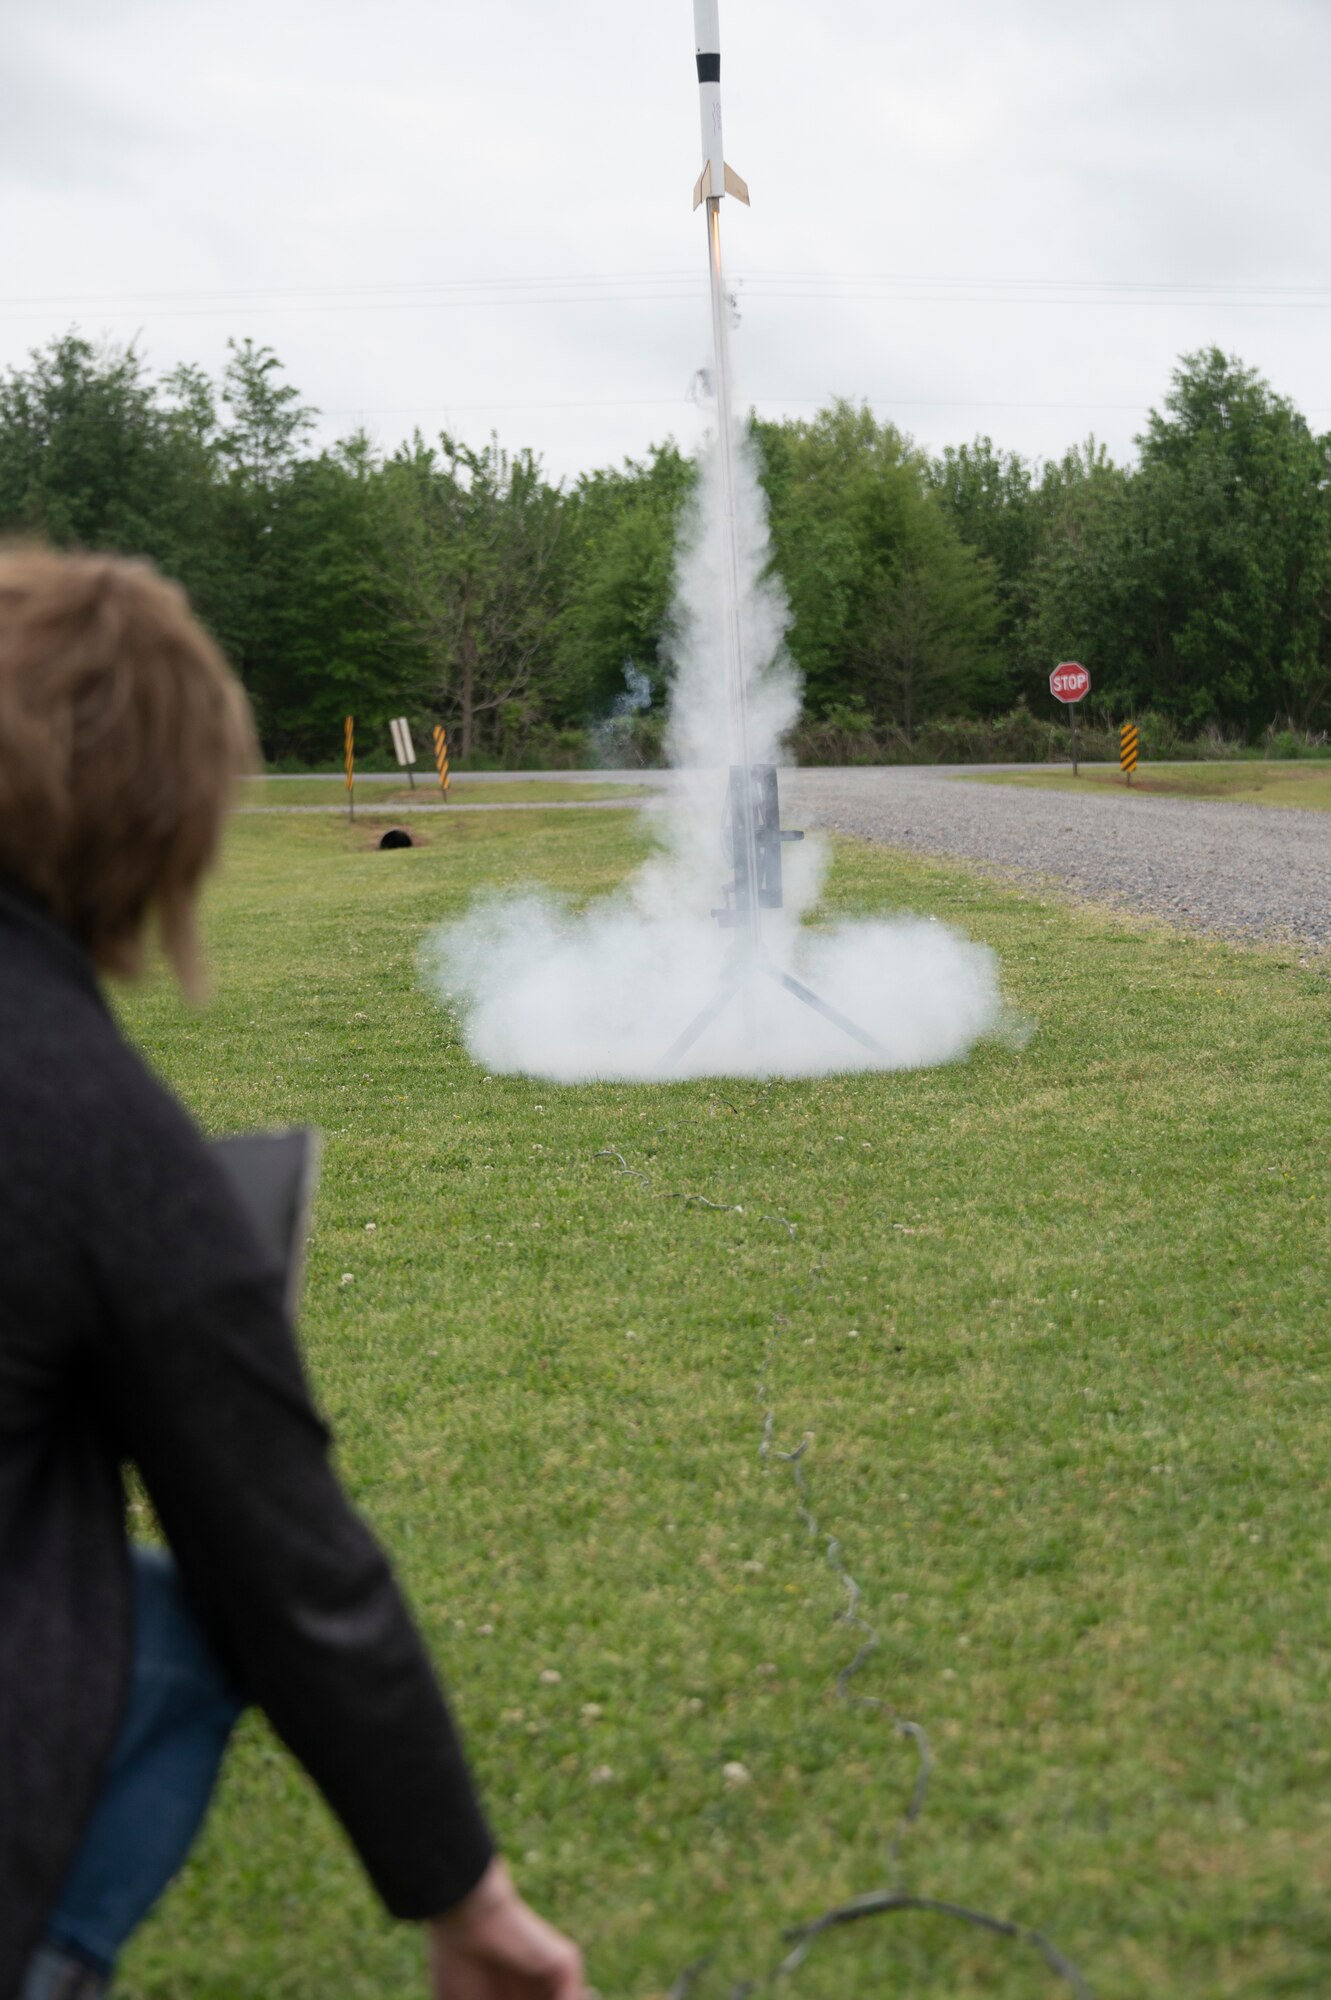 Photo of person launching a model rocket